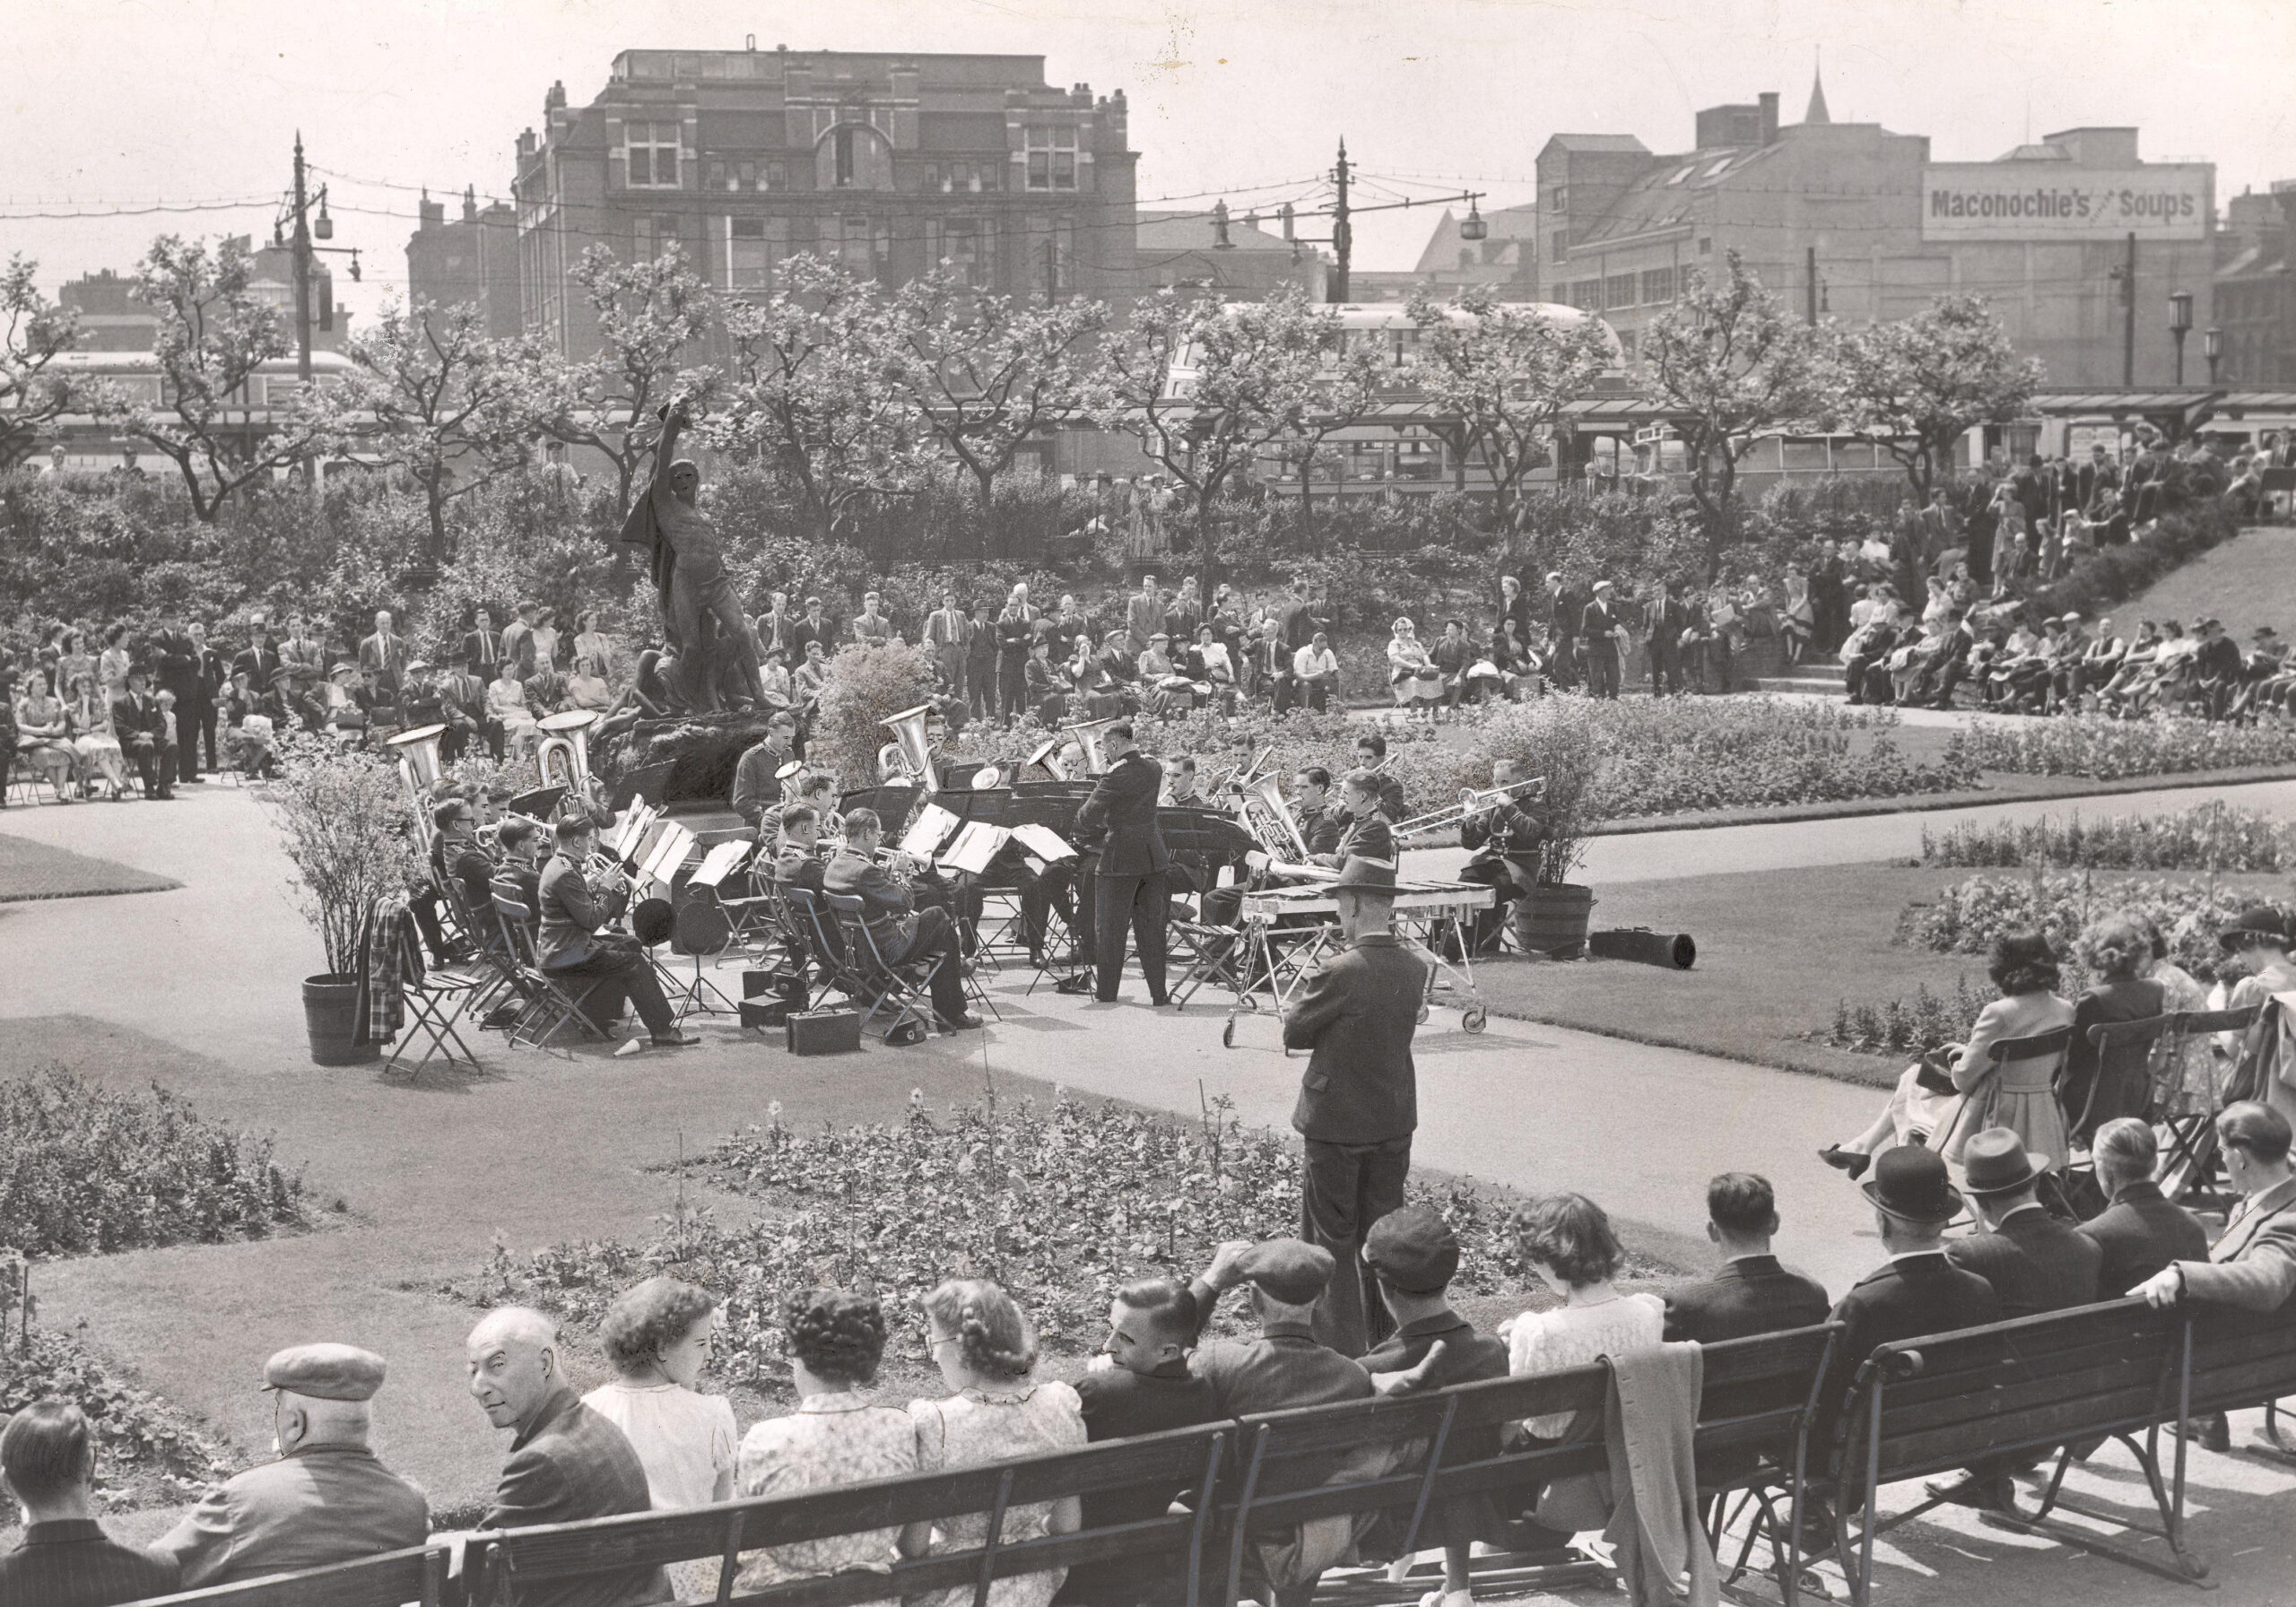 The CWS Manchester Band in Picadilly Gardens, Manchester, 1949